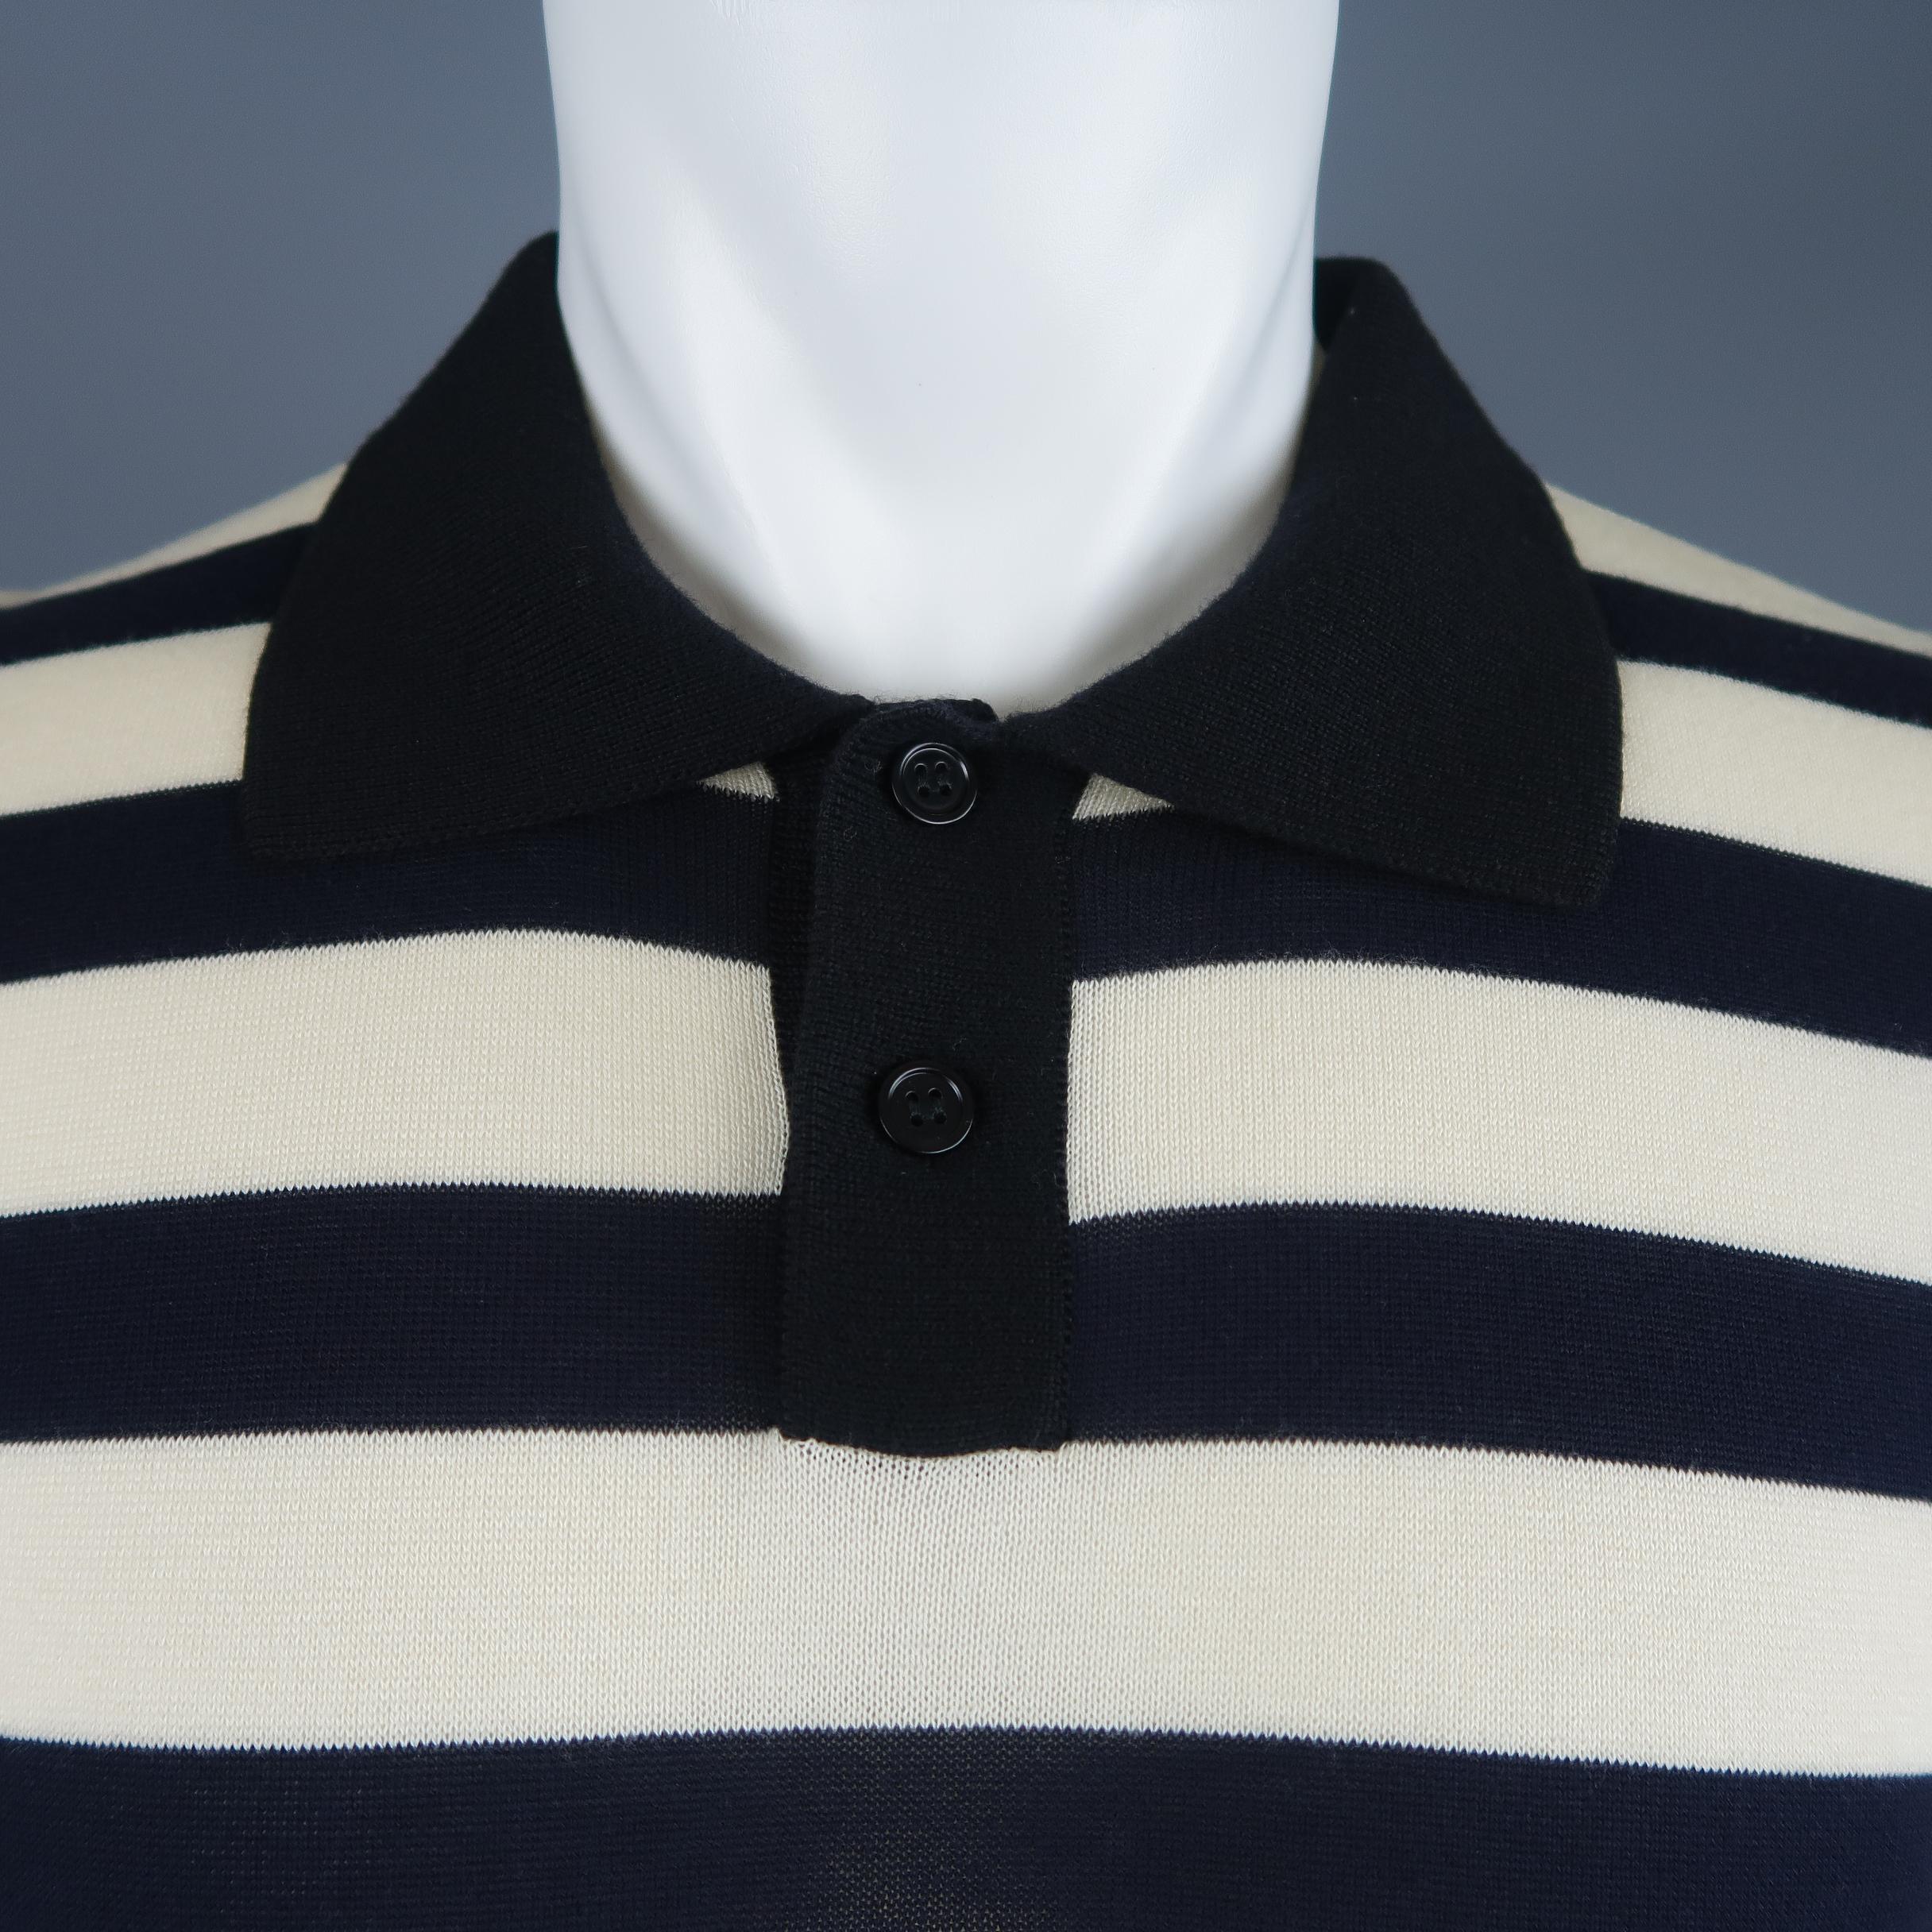 MARNI oversized polo comes in beige and navy striped cotton wool blend knit with patchwork details.  Made in Italy.
 
New with Tags. Pre-Owned Condition.
Marked: IT 48
 
Measurements:
 
Shoulder: 18 in.
Chest: 38 in.
Sleeve: 11 in.
Length: 30 in.